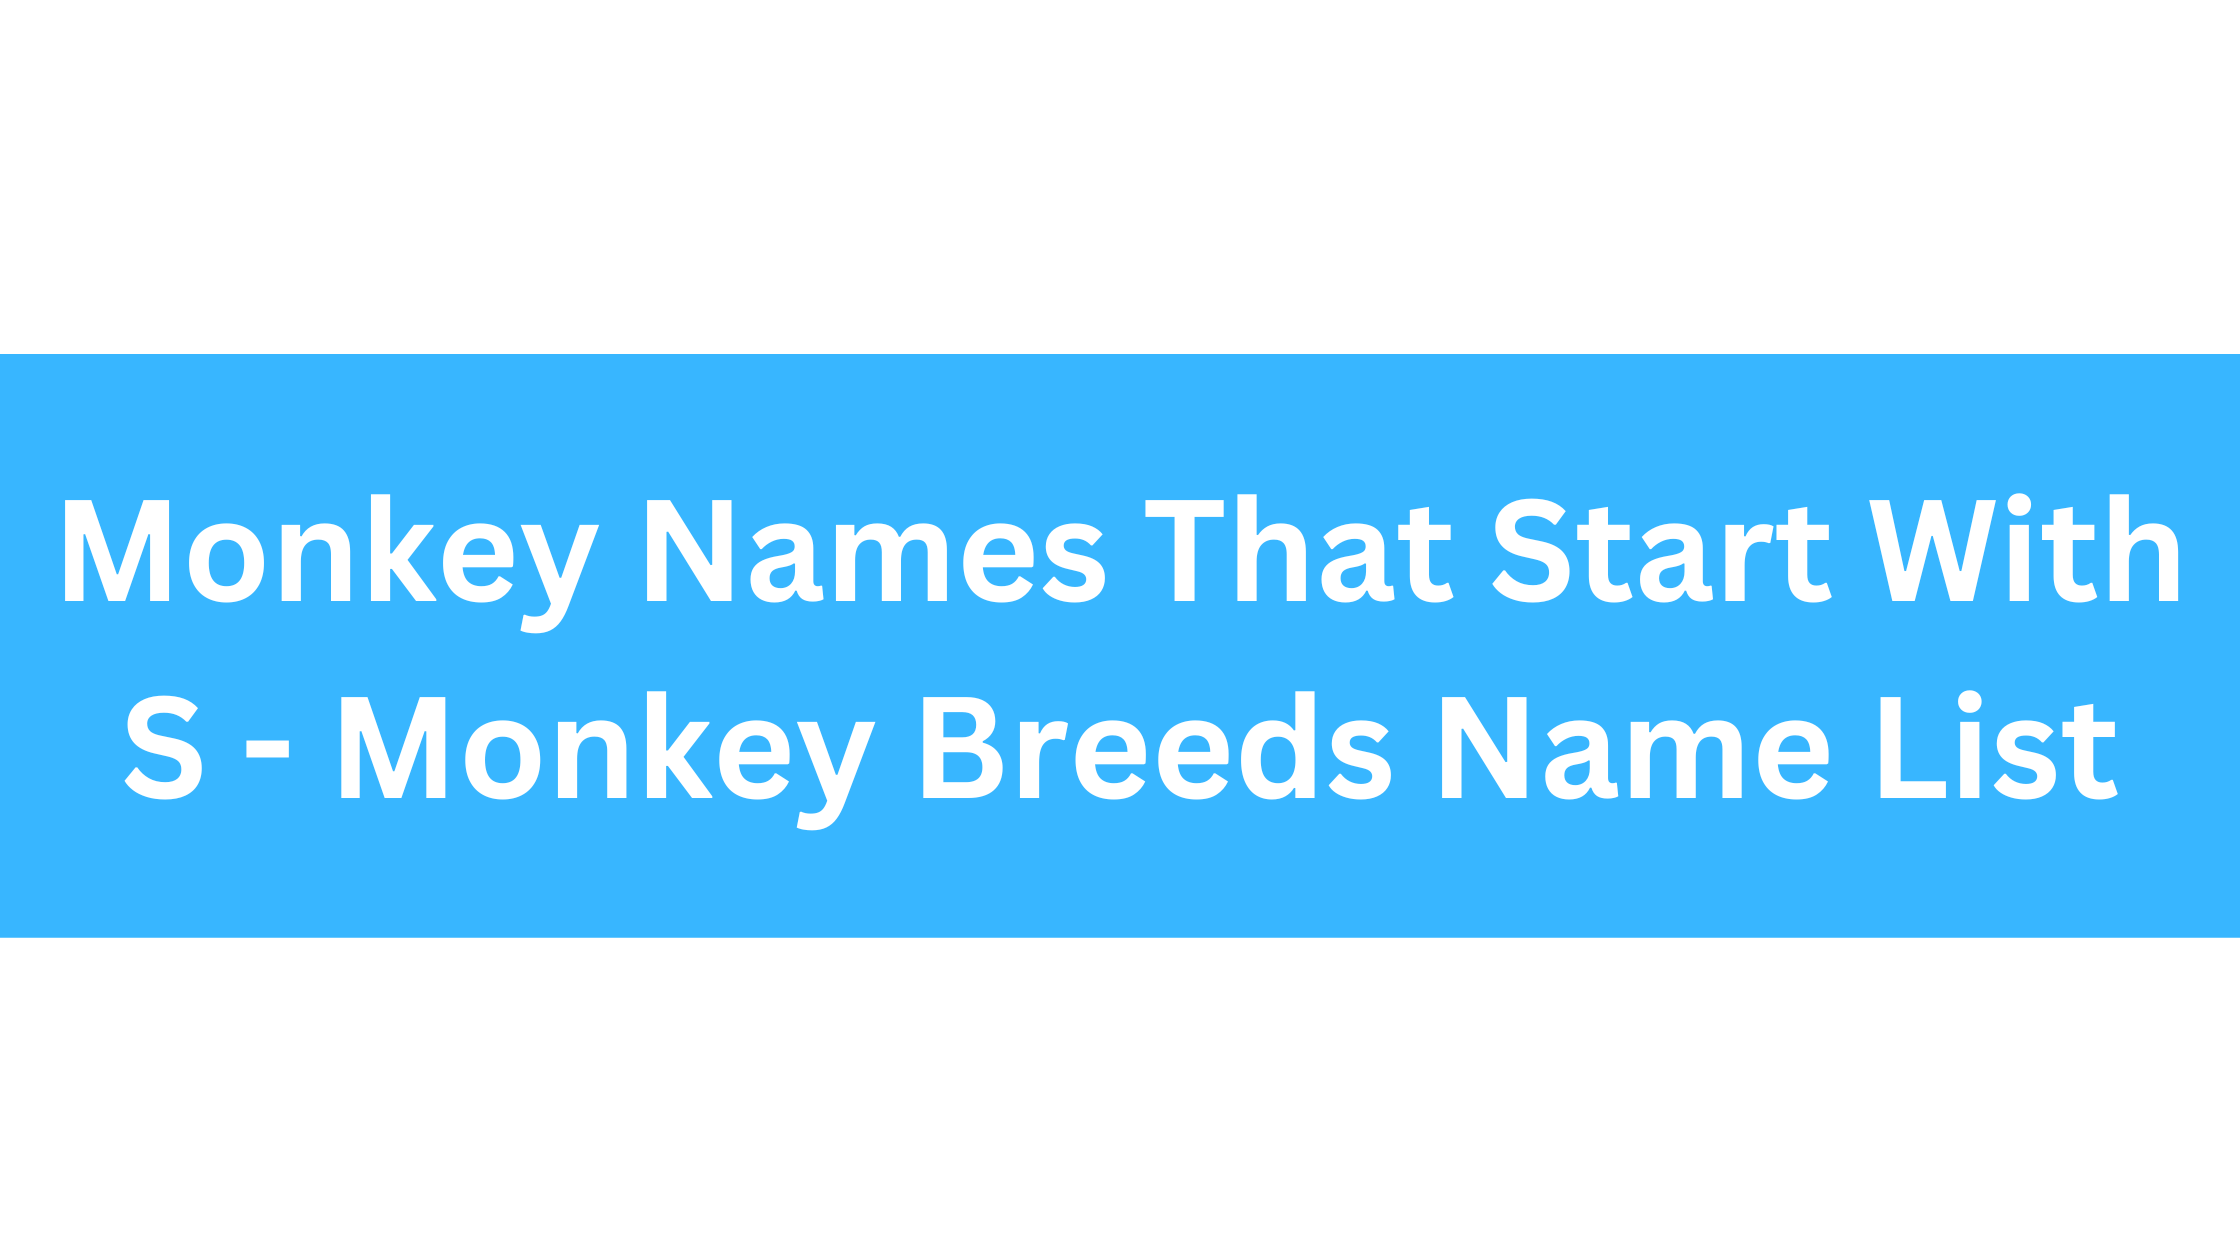 Monkeys That Start With S